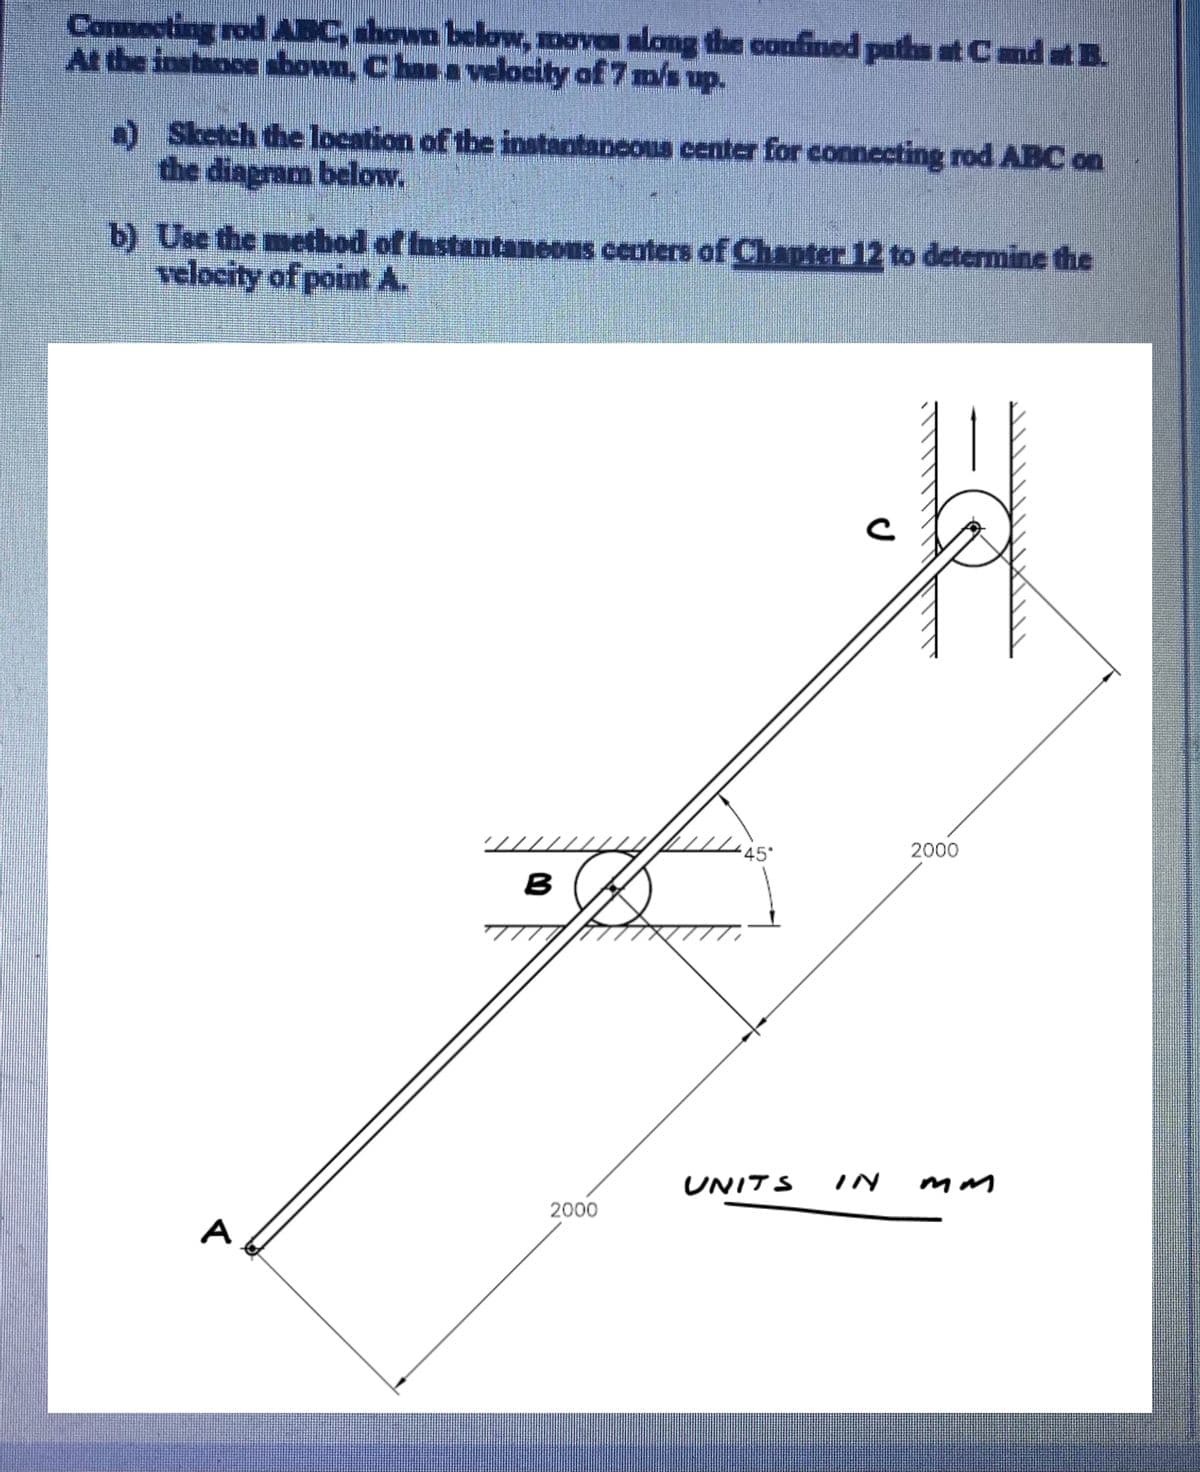 Connecting rod AEC, ahown below, moves along the confined paths at Cnd at B.
At the instance abown, Chan a velocity of 7 m/s up.
) Sketch the location of the instantancous center for connecting rod ABC on
the diagram below.
b) Use the method of Instantaneous centers of Chapter 12 to determine the
velocity of point A.
45°
2000
B
UNITS
IN
2000
A
